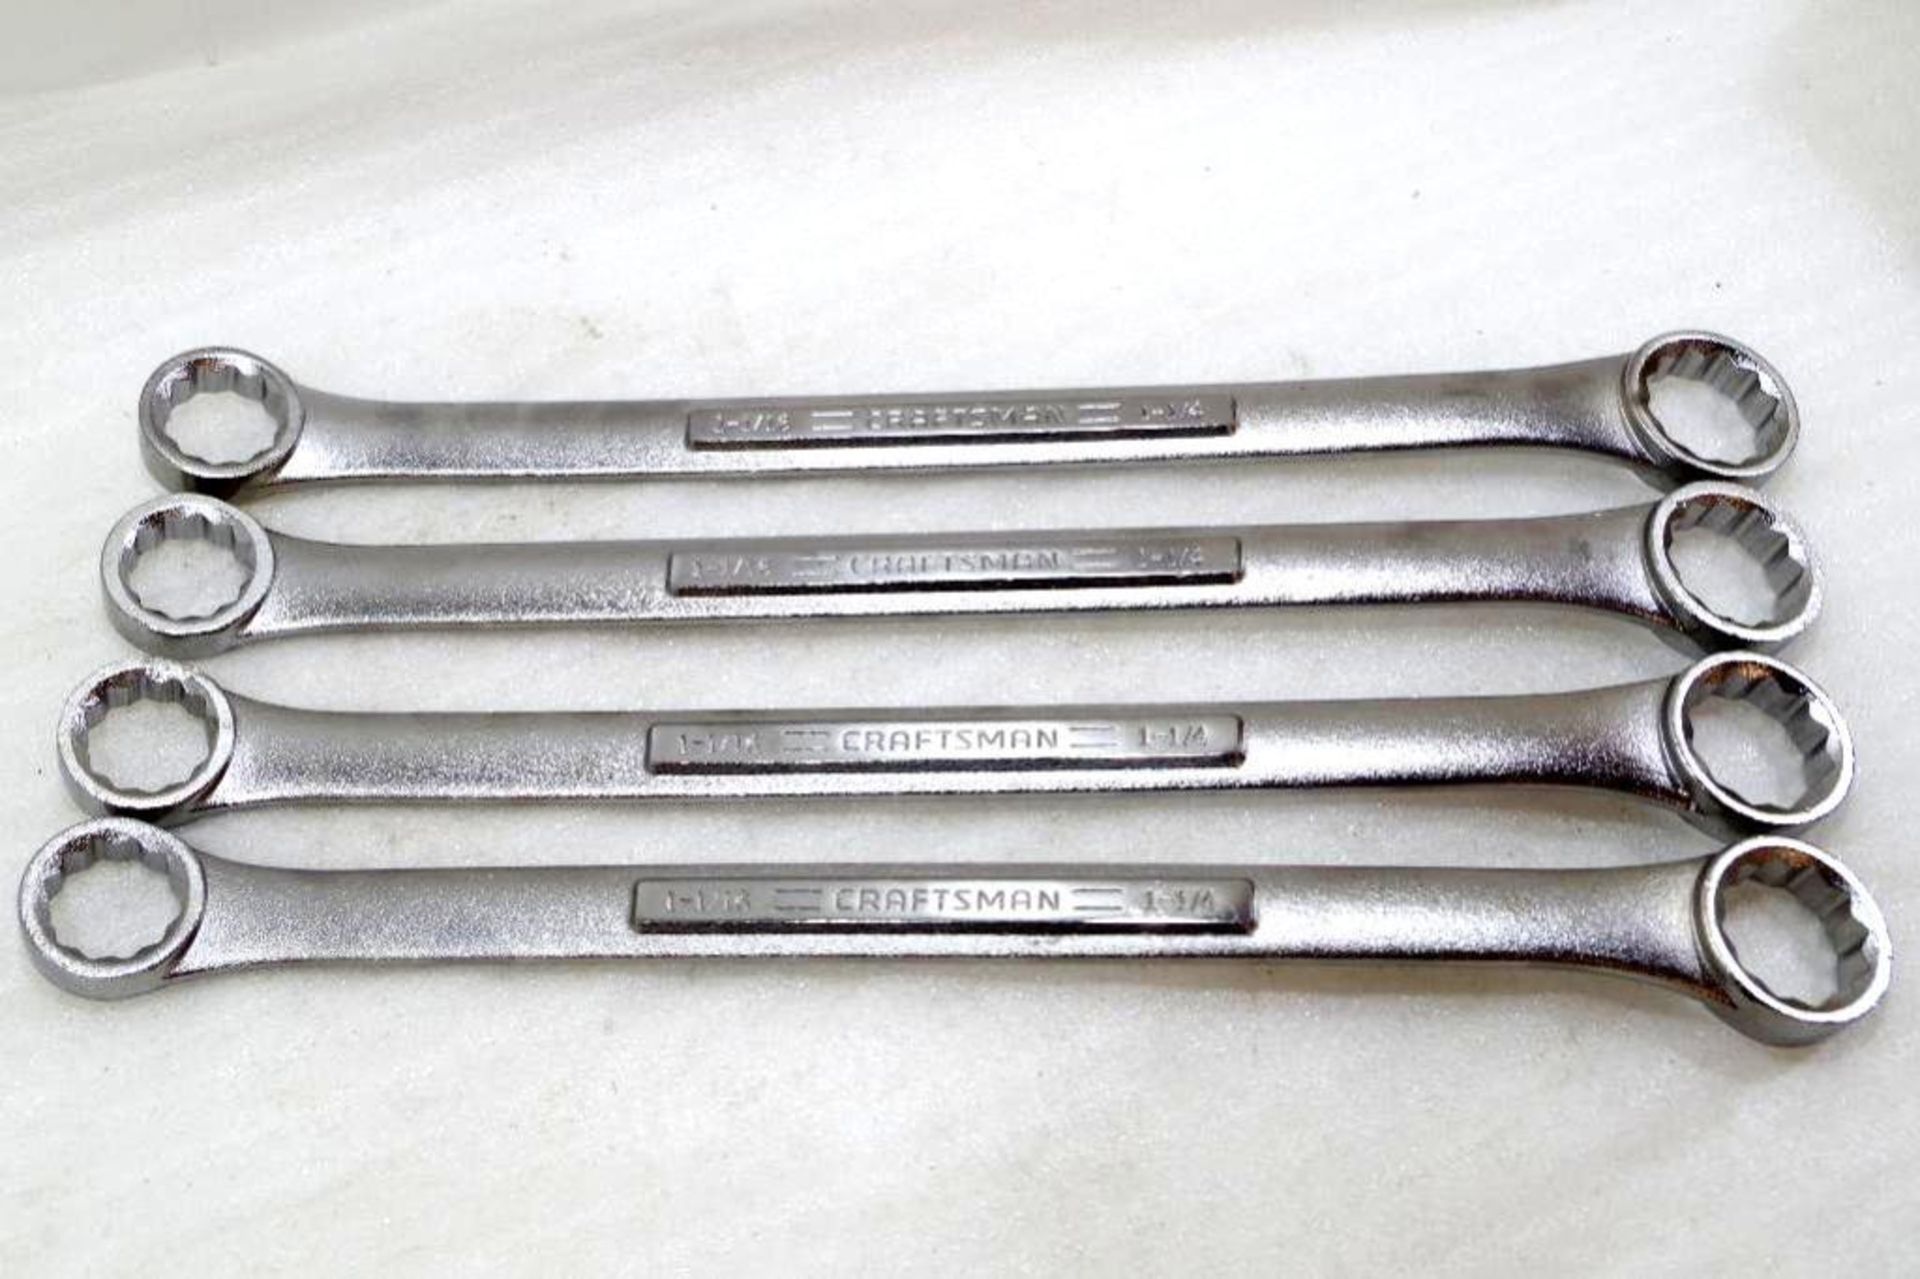 (4) NEW CRAFTSMAN Box-End Wrenches, 1-1/16" / 1-1/4", Forged in USA - Image 3 of 3